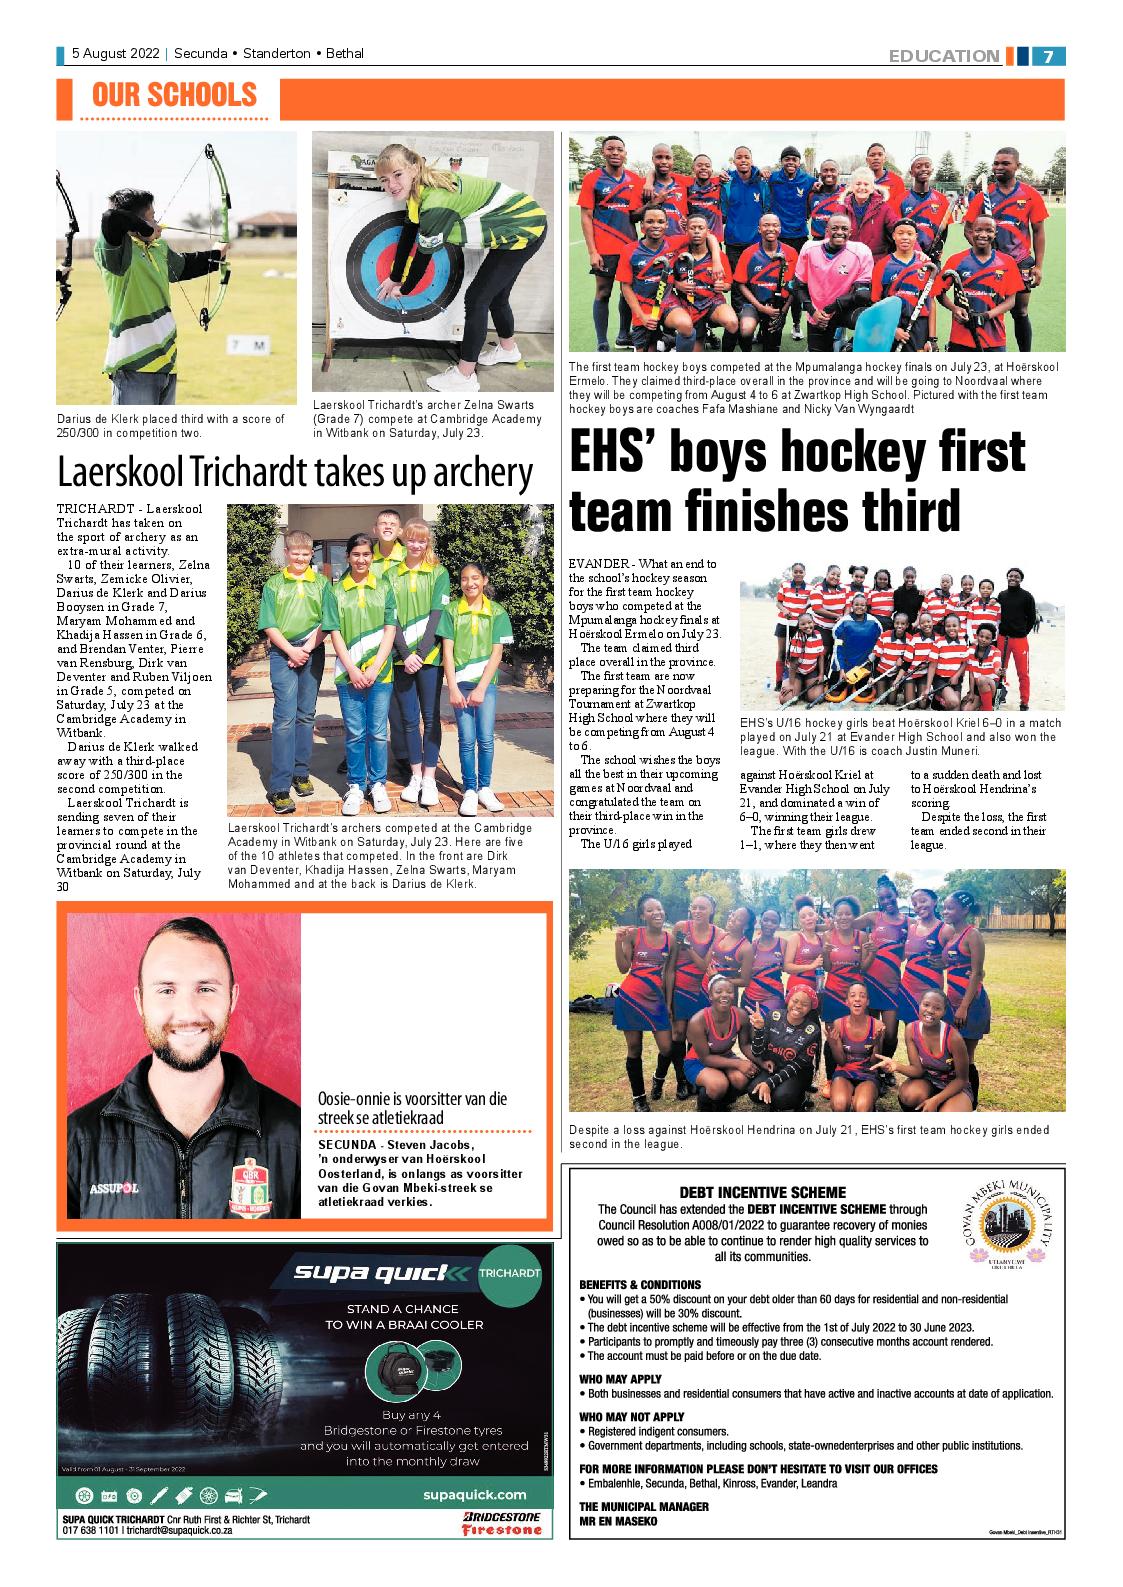 Ridge Times 5 August 2022 page 7